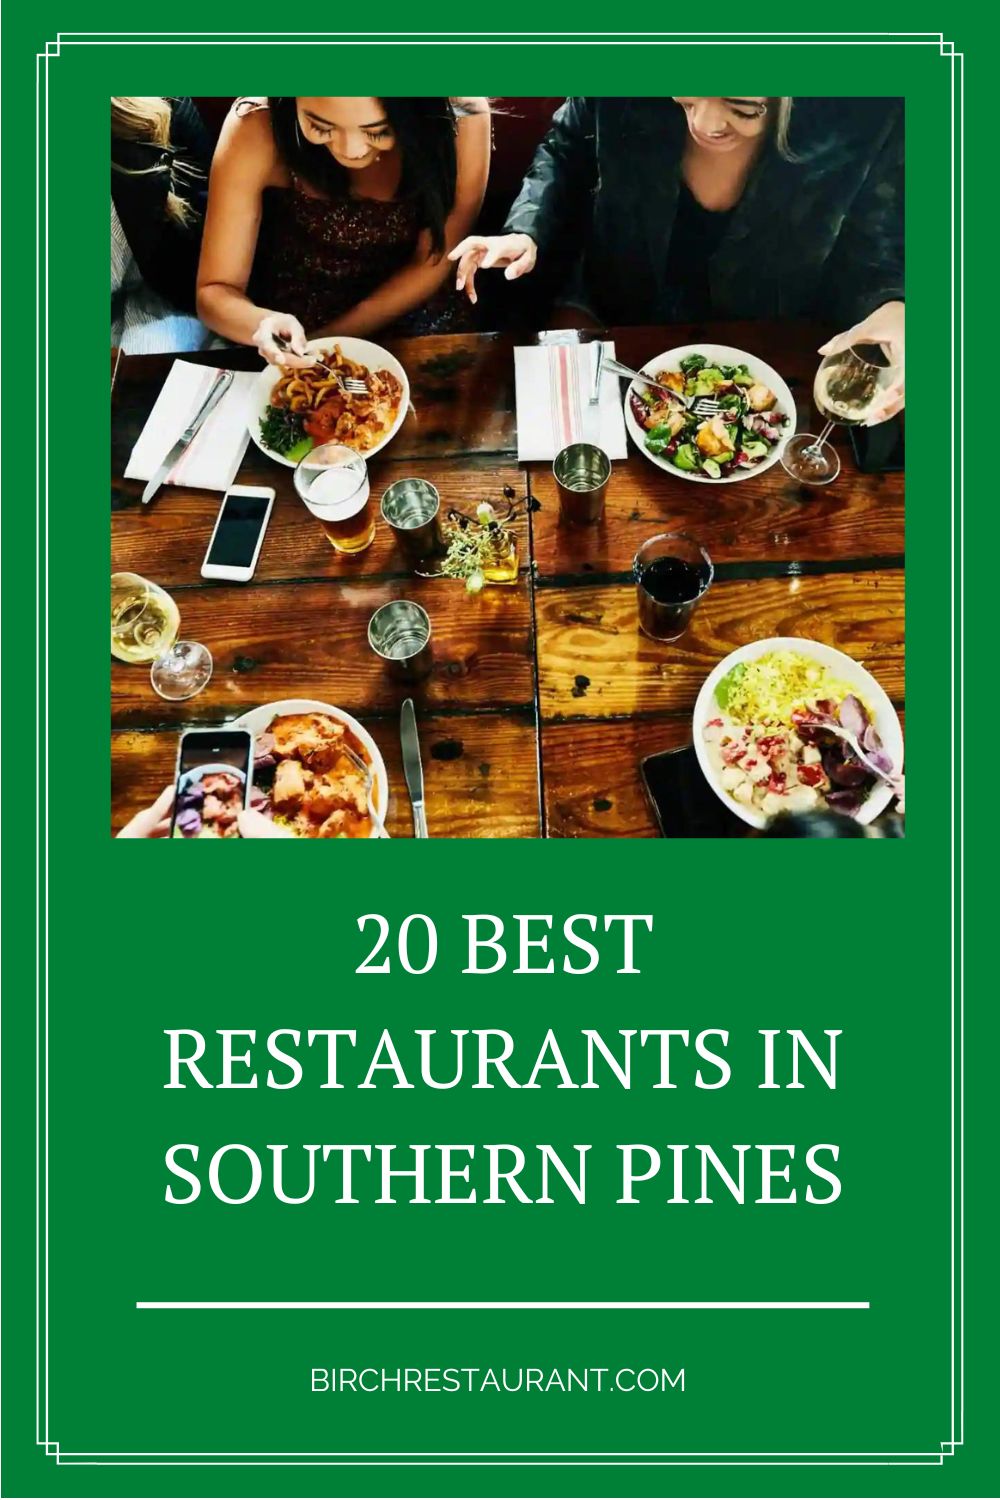 Best Restaurants in Southern Pines